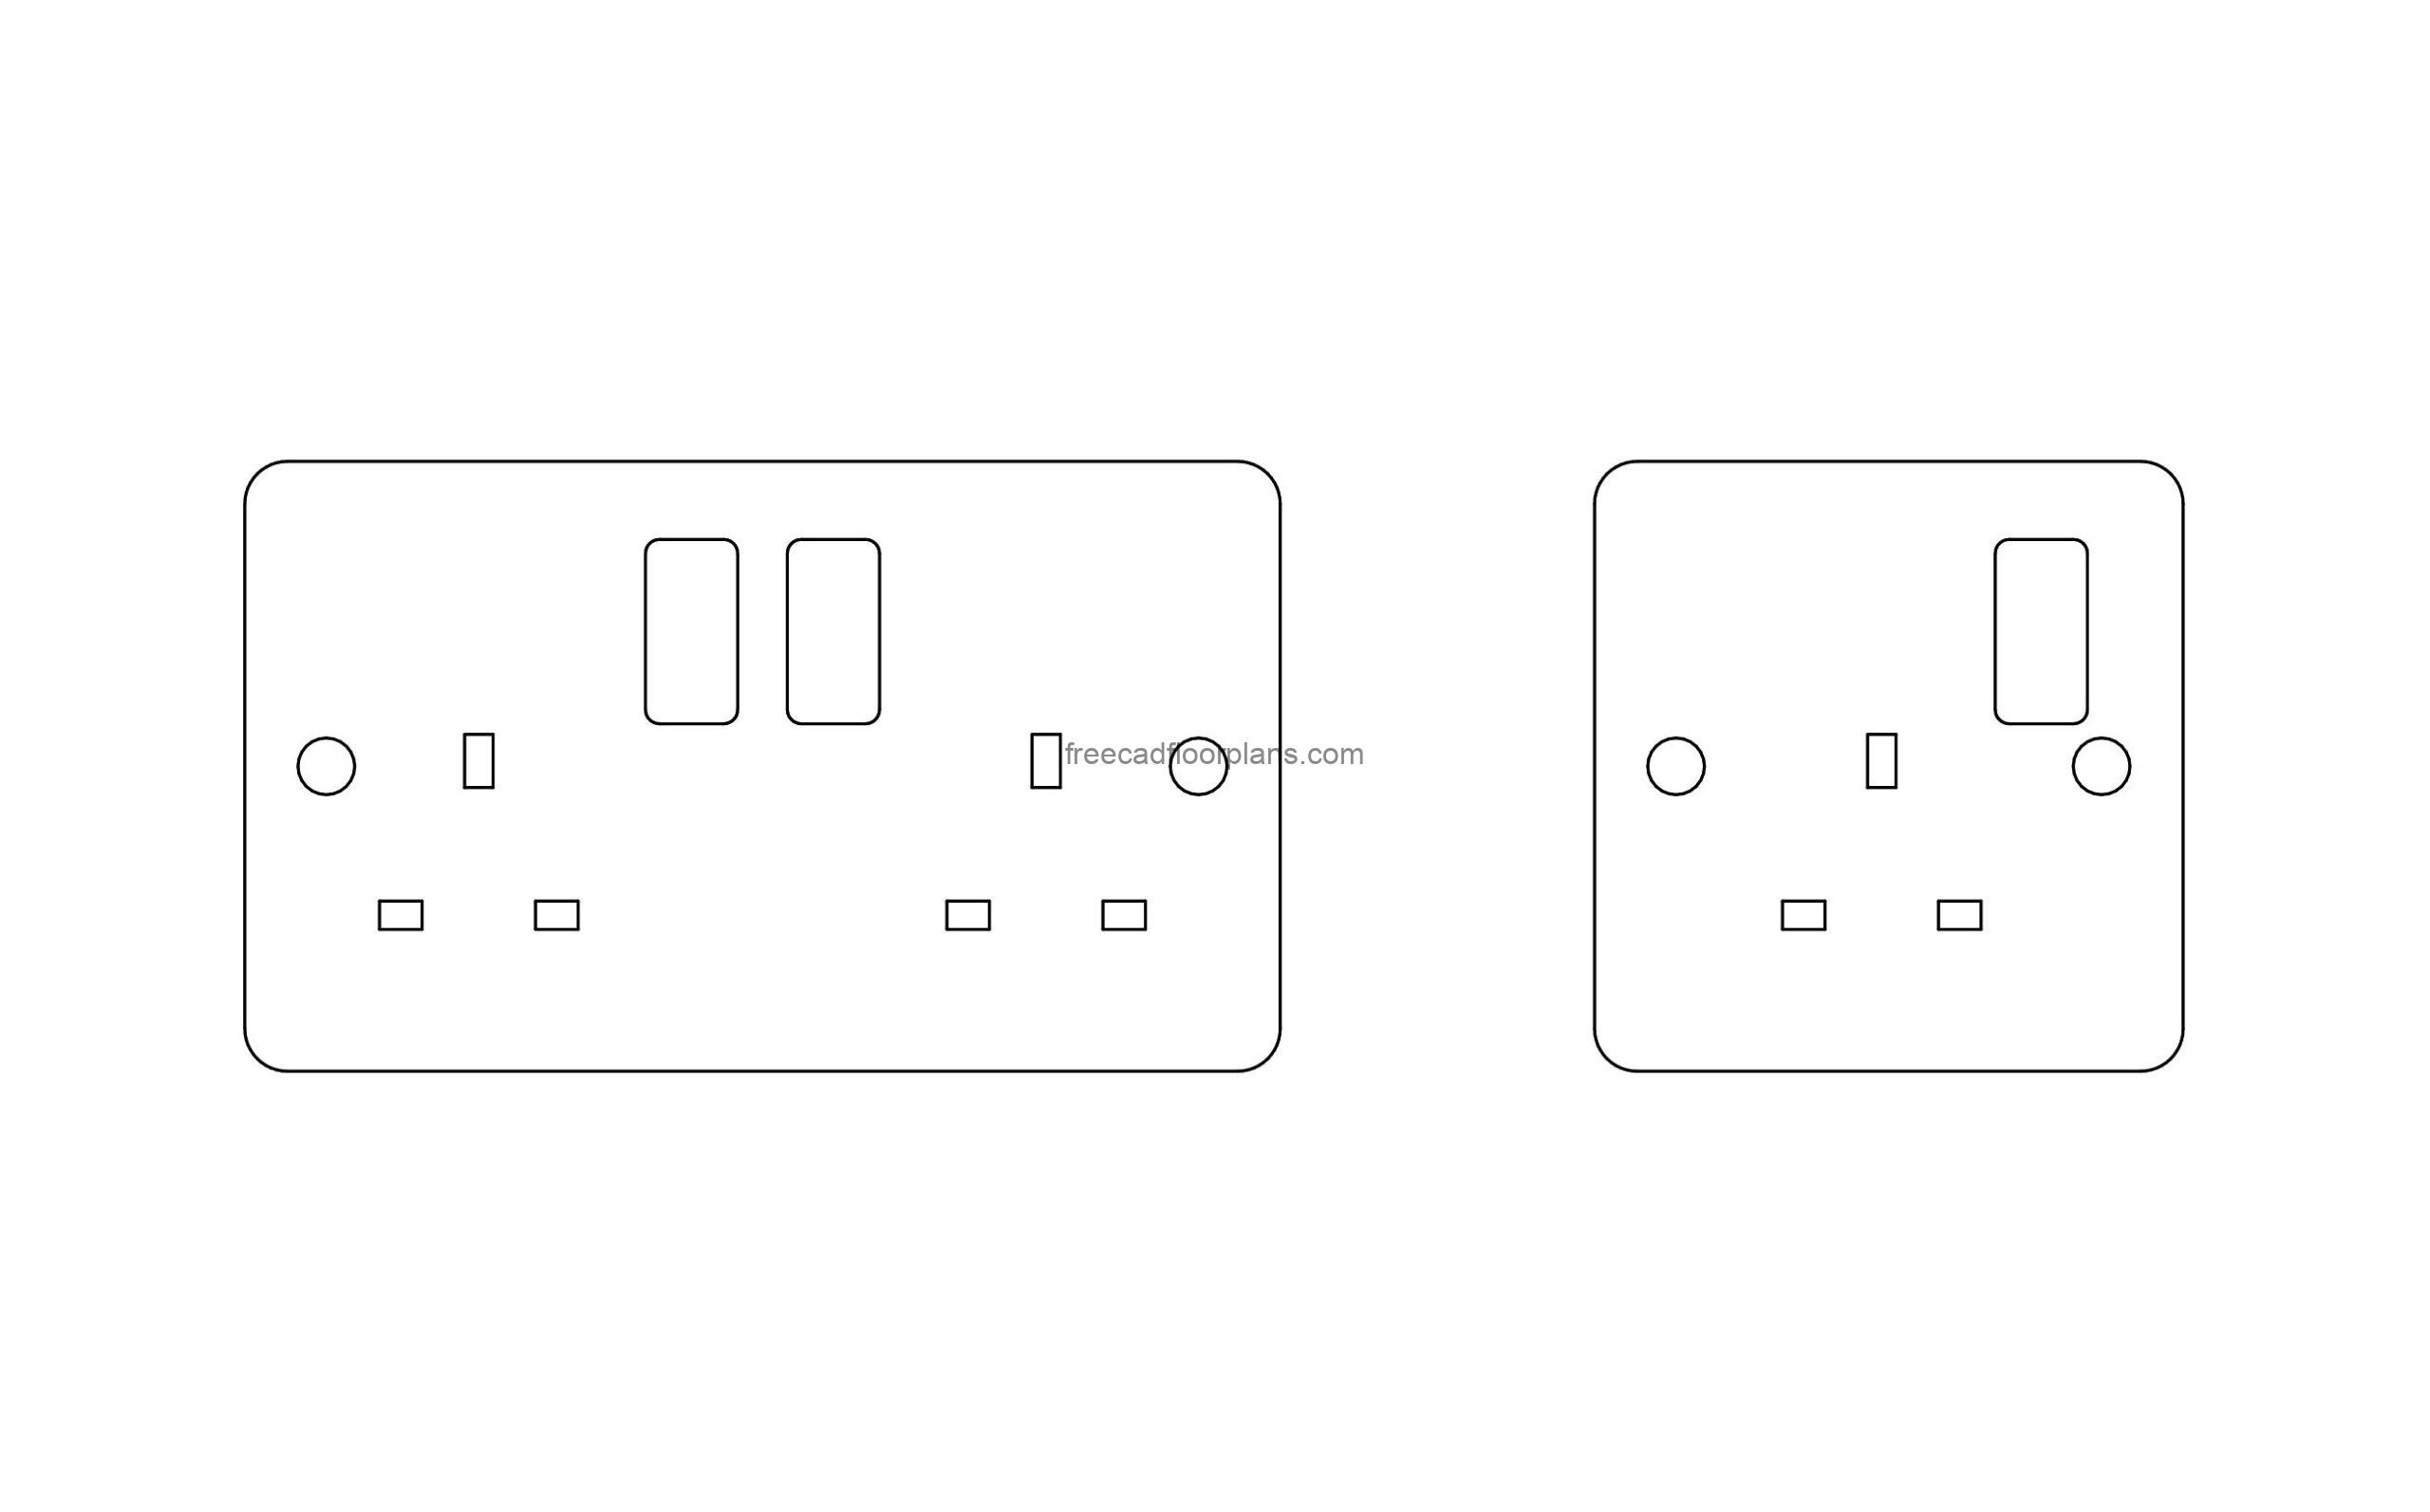 UK plug socket drawing front face in DWG CAD format for free download